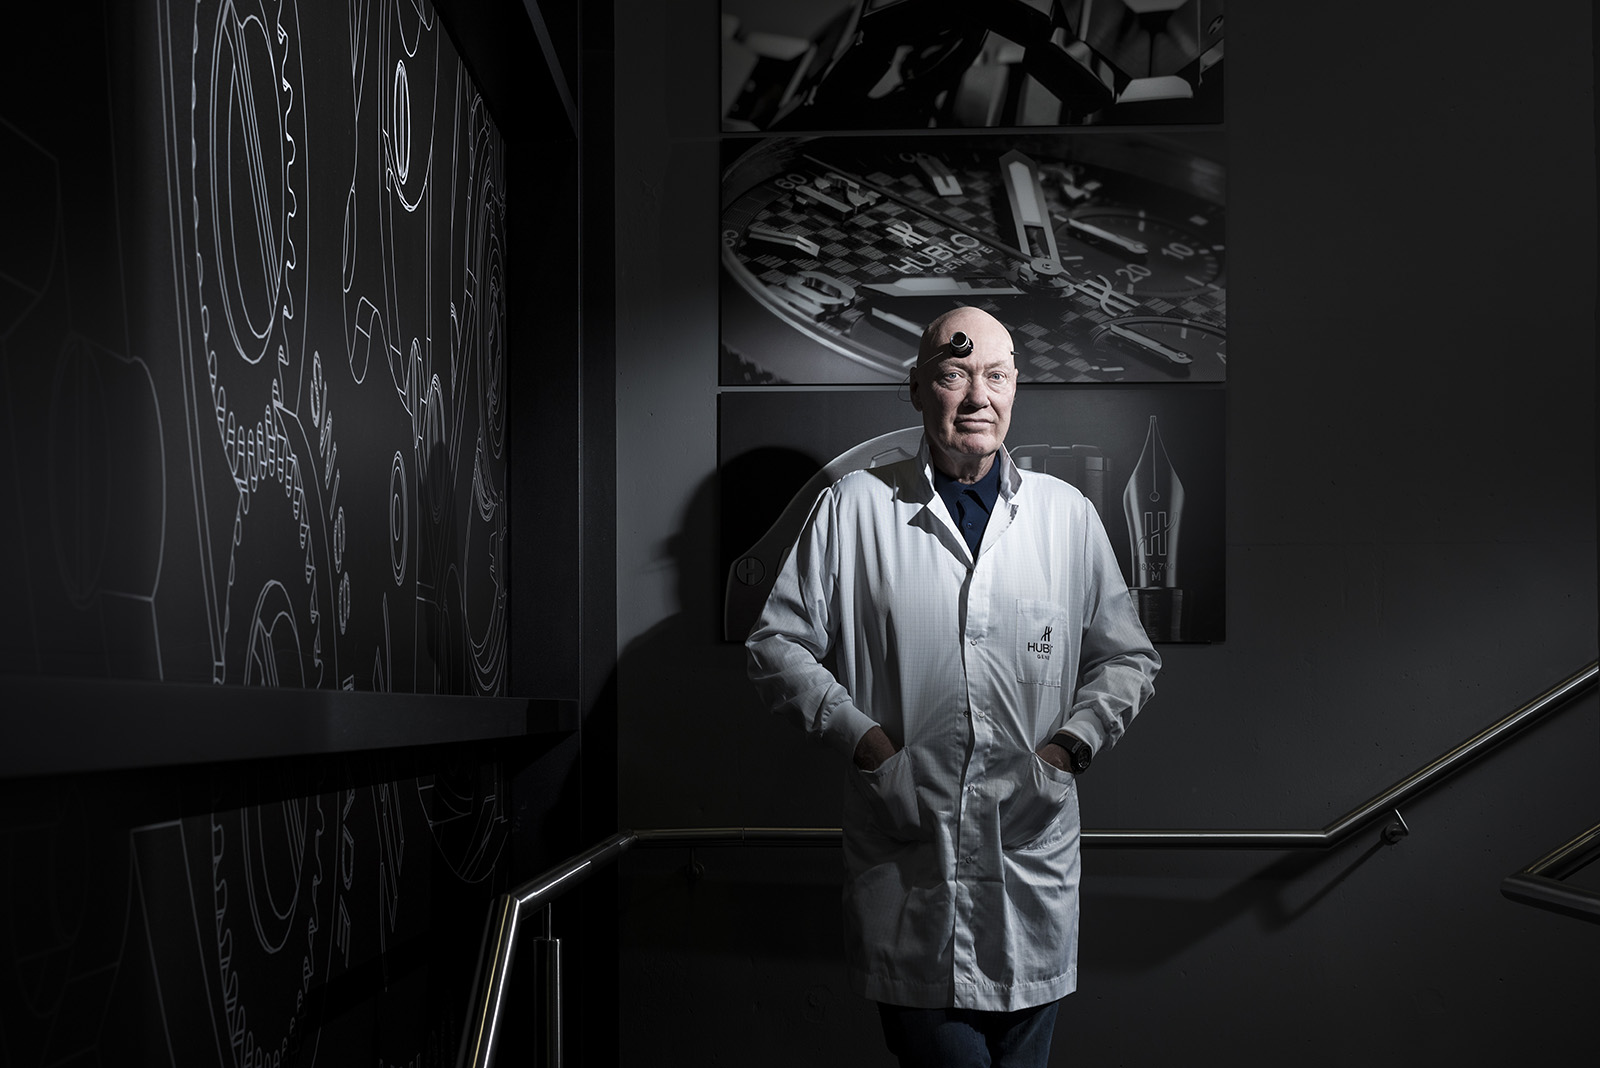 Jean-Claude Biver, head of the watch division at luxury conglomerate LVMH Moet Hennessy Louis Vuitton. Hublot Manufacture, Nyon, Switzerland, 14 February 2018 © Fred Merz | Lundi13 for The Wall Street Journal.